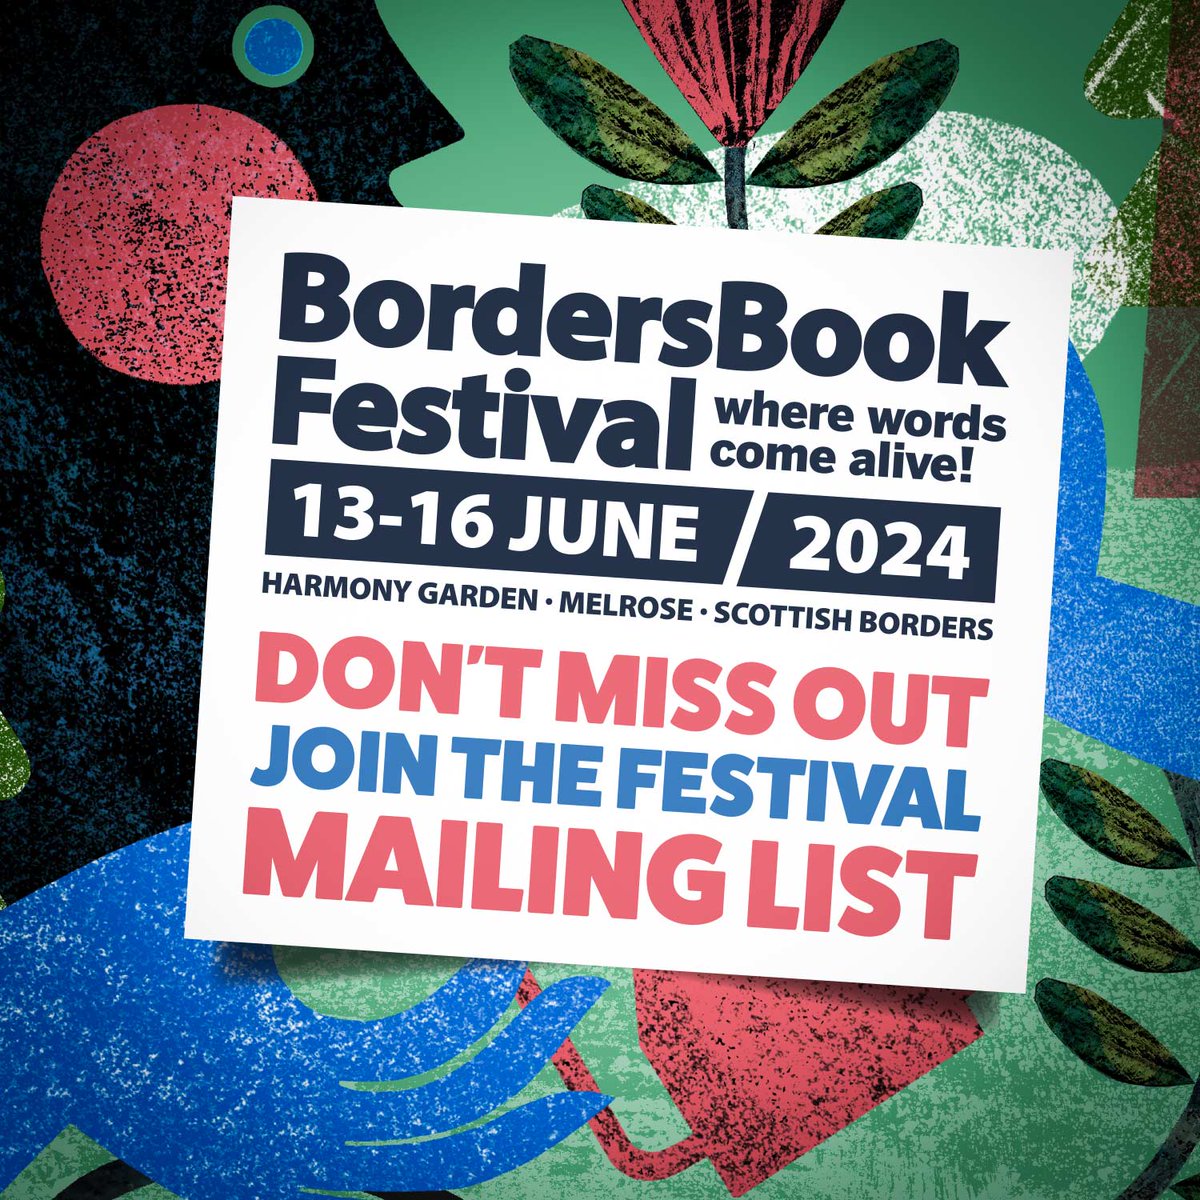 Regular e-newsletters keep you up-to-date with everything you need to know about this year's festival - and more! You know you want to. CLICK HERE TO JOIN: bit.ly/3QrgAc6